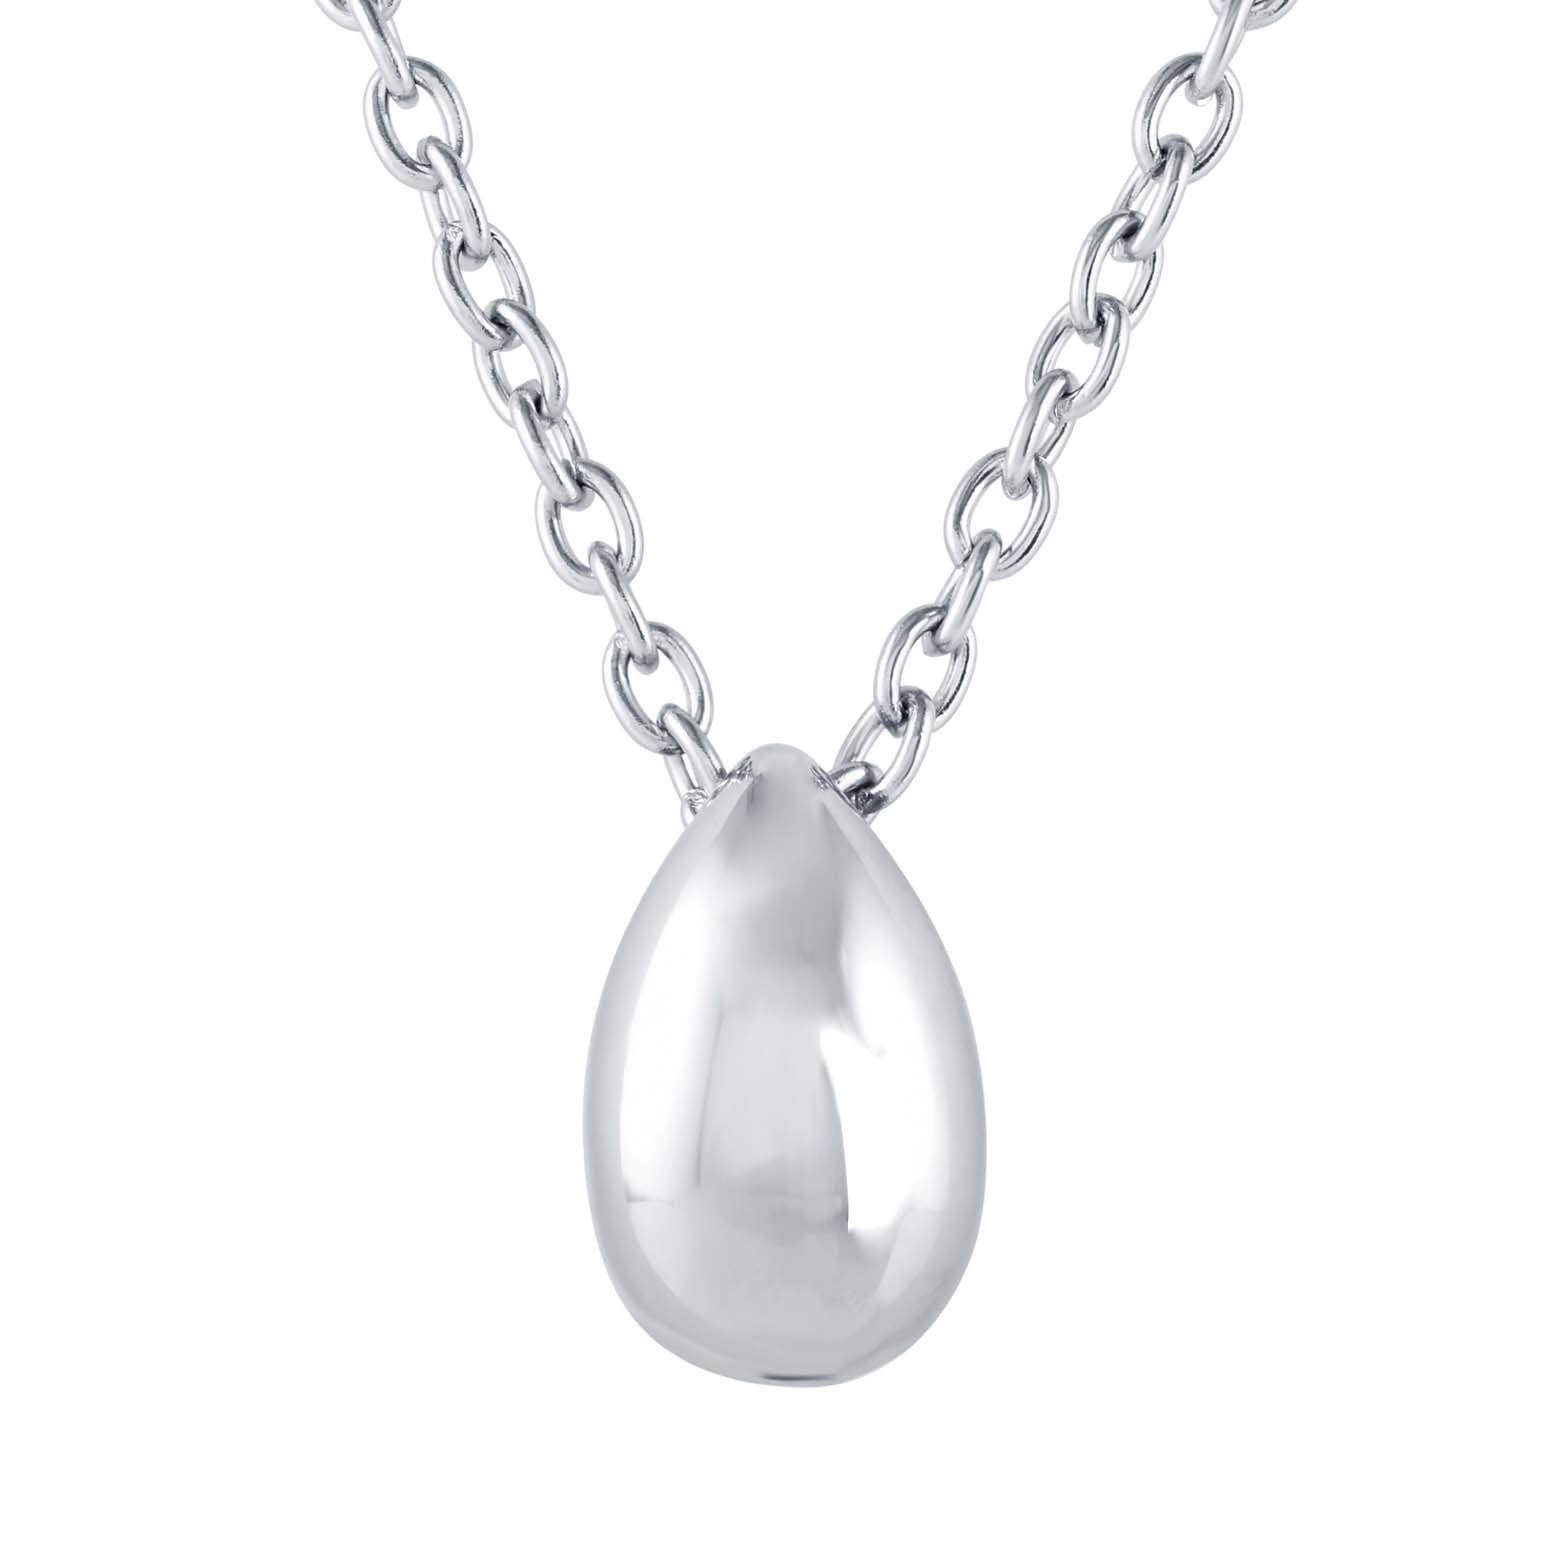 Teardrop Cremation Necklace that holds Ashes